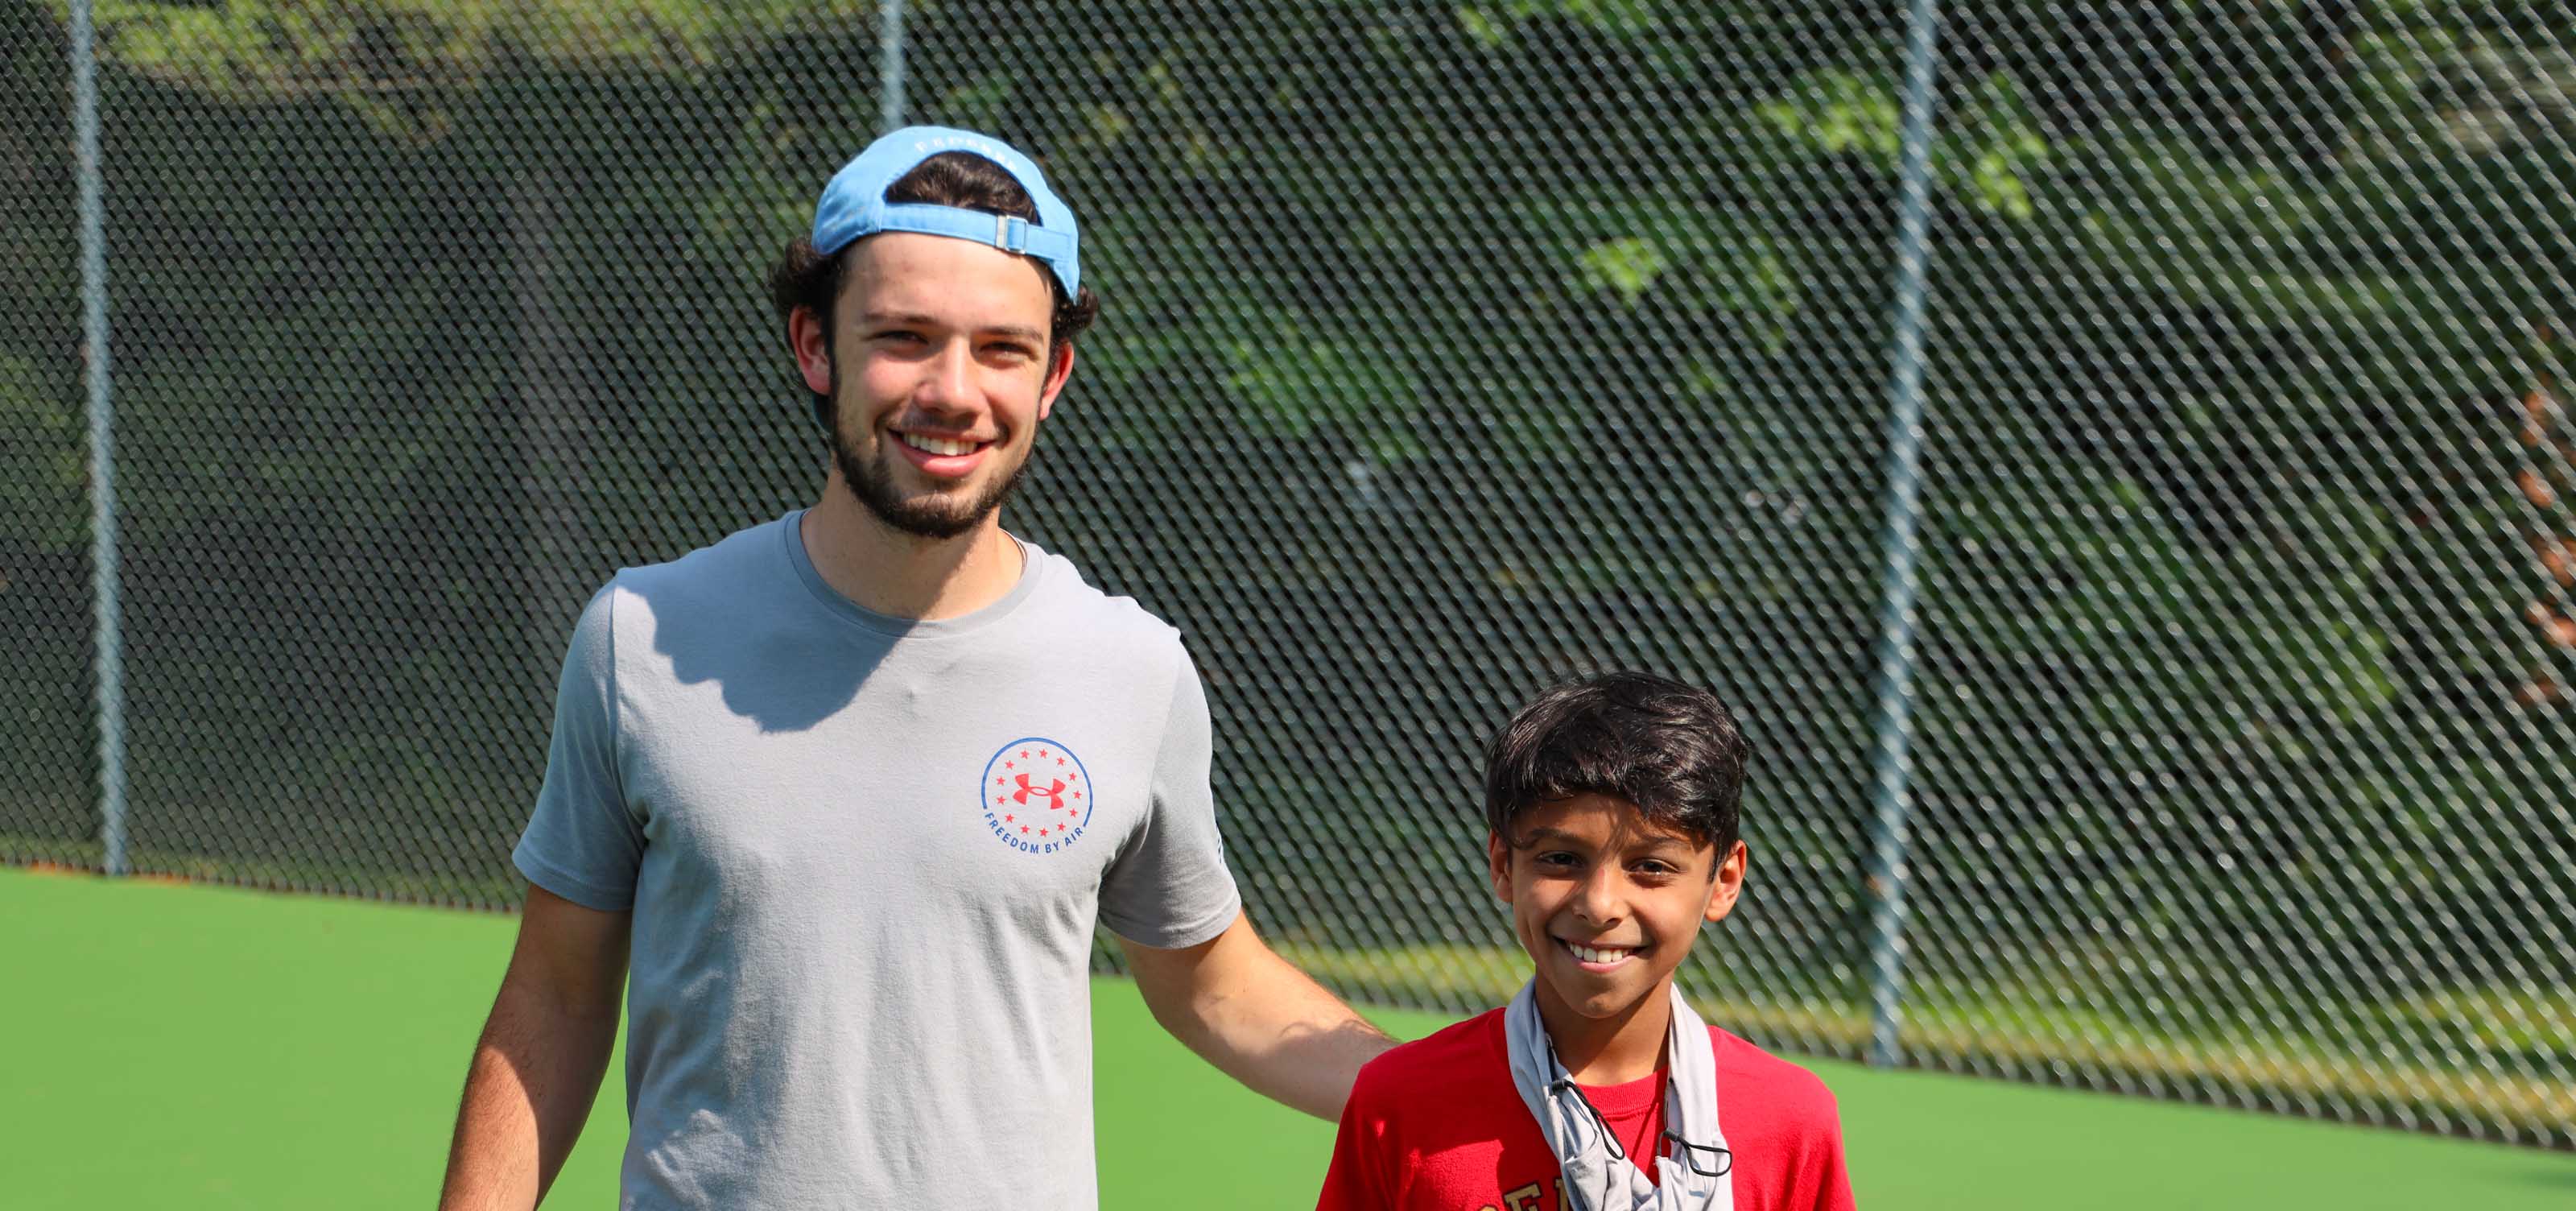 camp counselor and boy on tennis court smiling for camera.